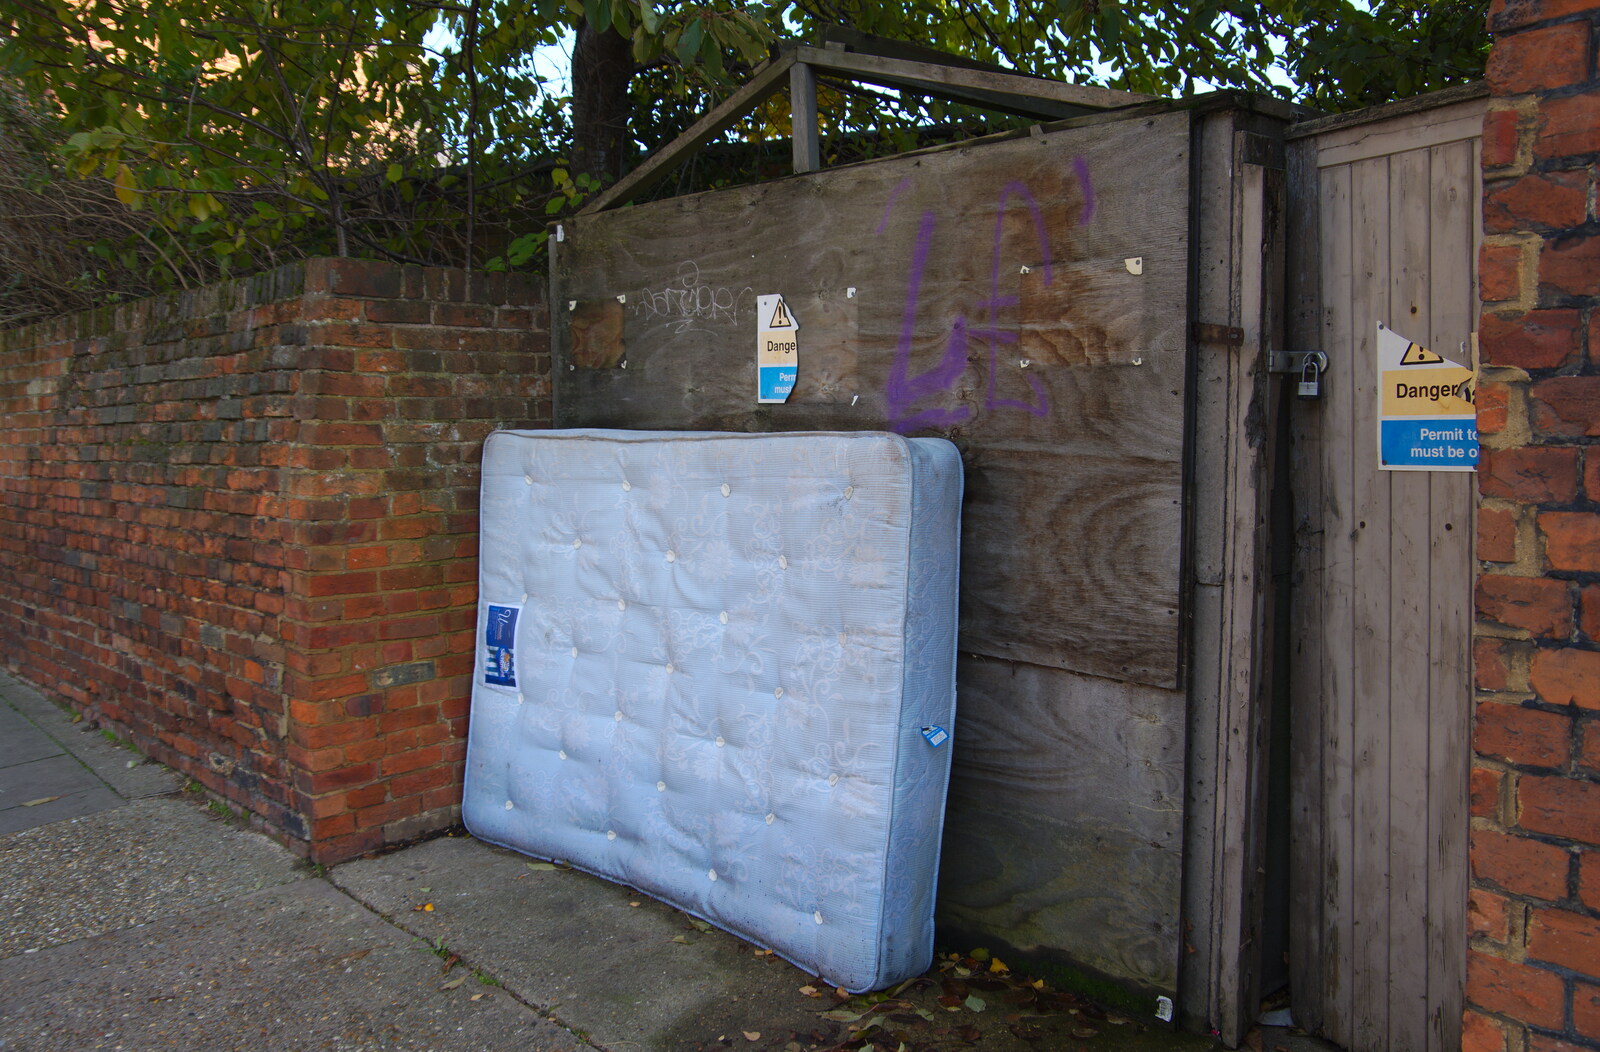 A mattress leans folornly up against a fence from Exam Day Dereliction, Ipswich, Suffolk - 13th November 2019